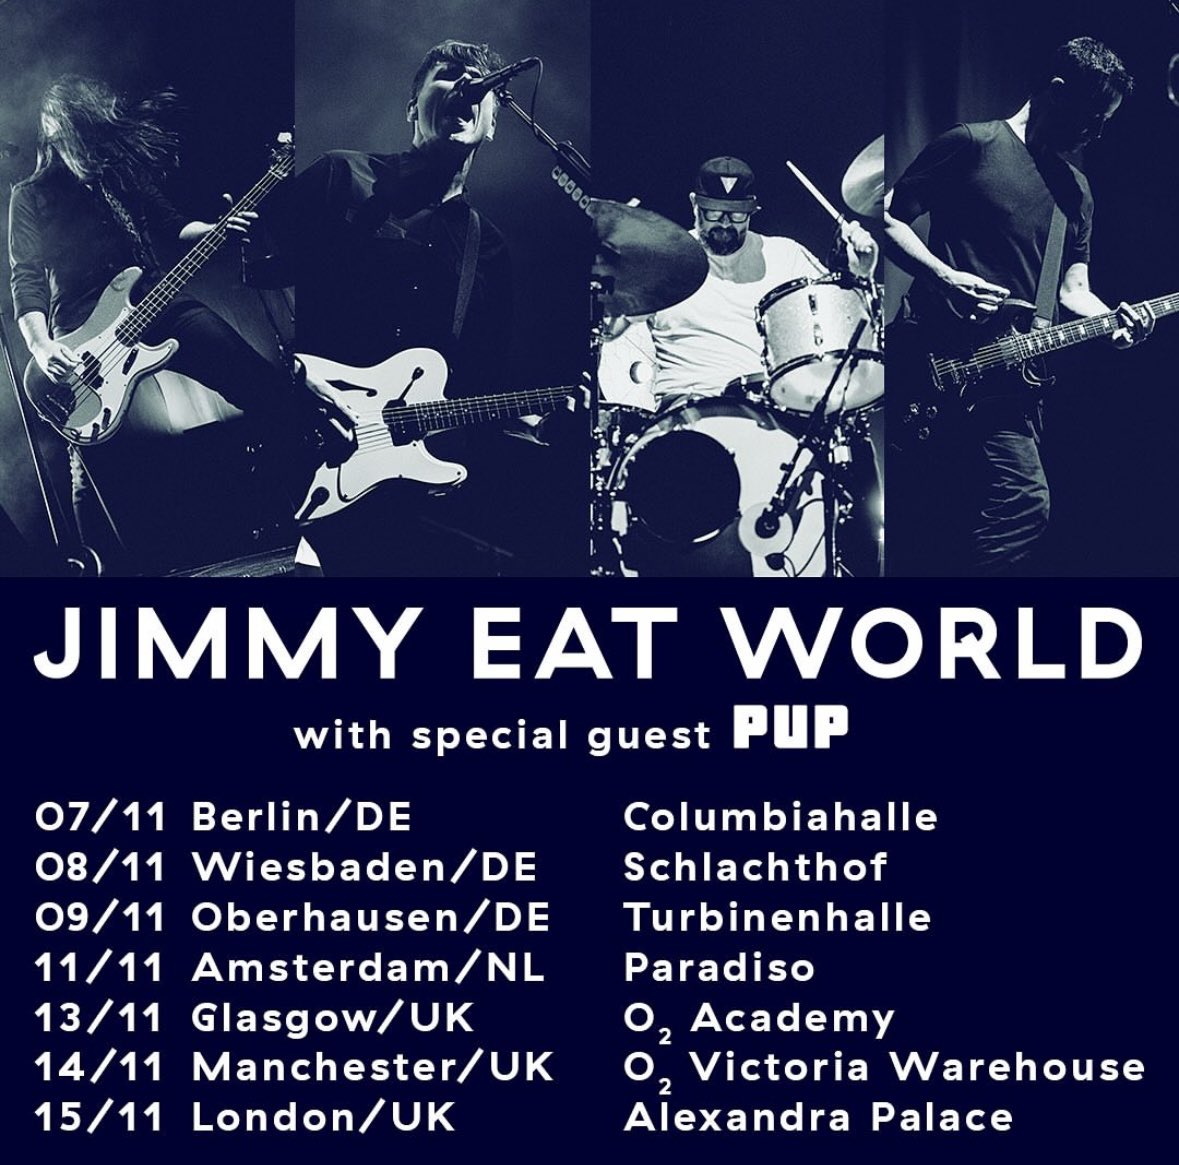 Just announced - Jimmy Eat World are returning to the UK and EU for a run of live shows this November